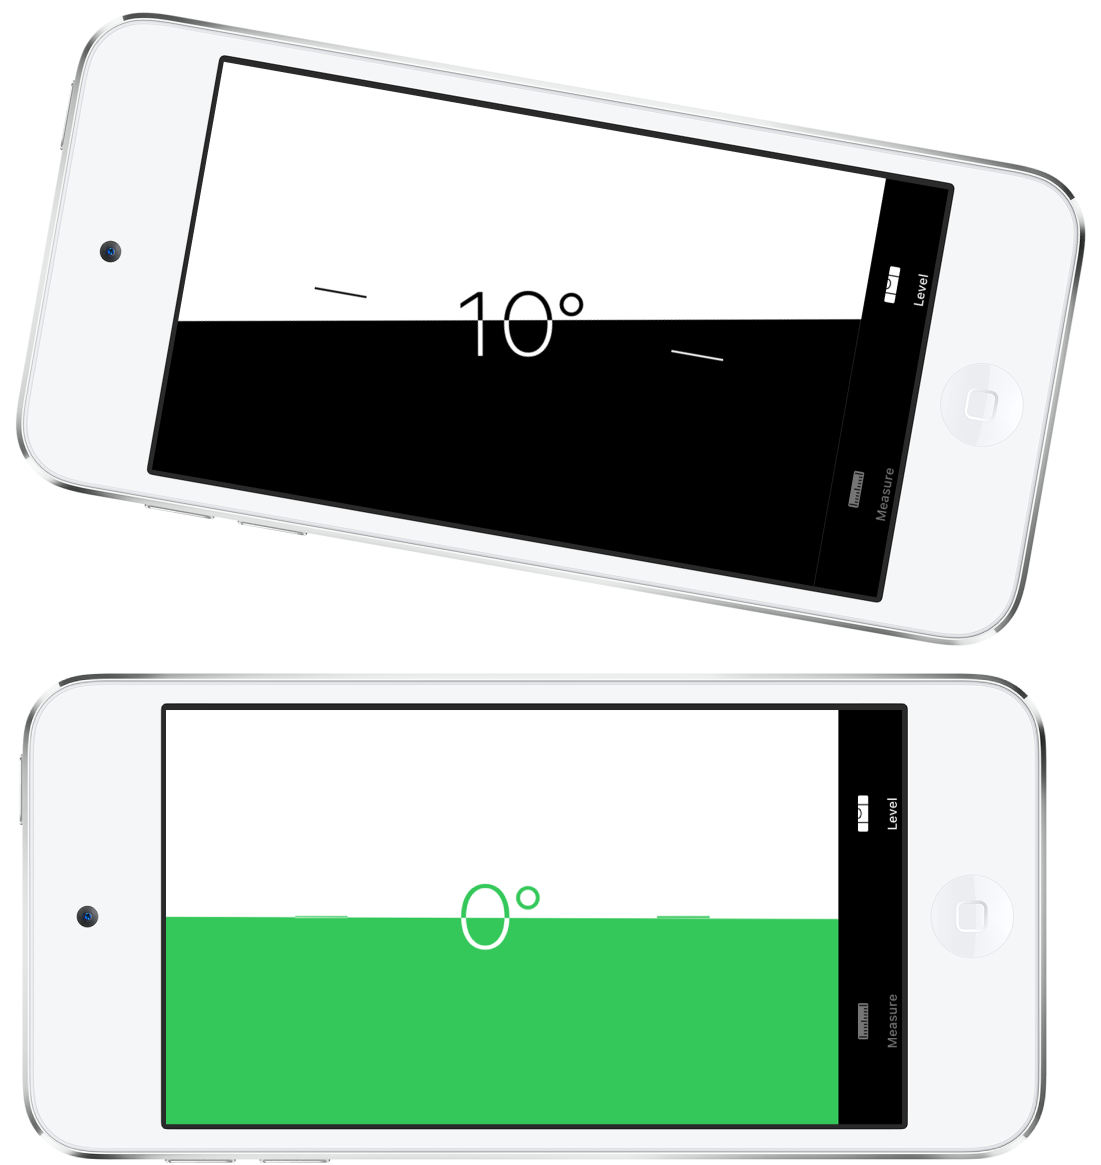 The level screen. On the top, iPod touch is tilted at an angle of ten degrees; on the bottom, iPod touch is level.